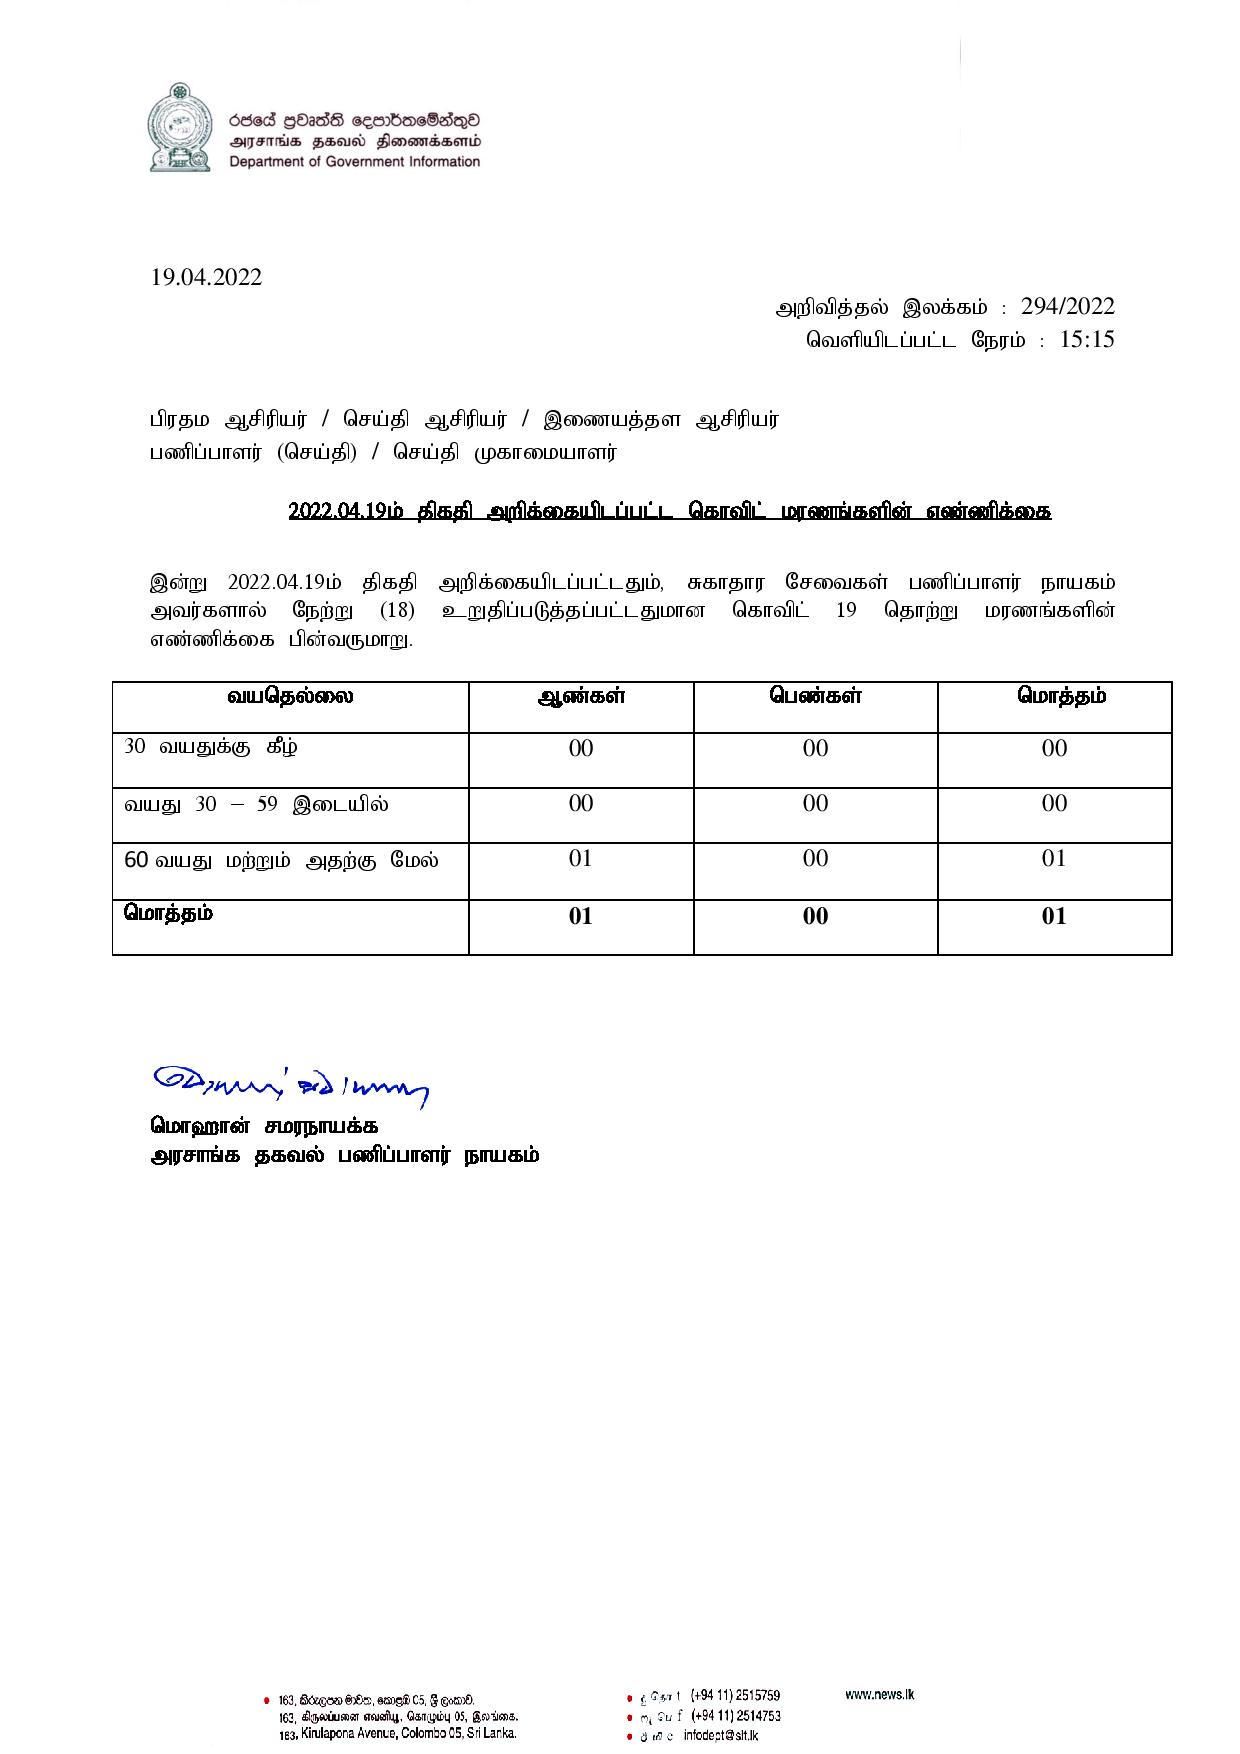 Press Release 294 Tamil page 001